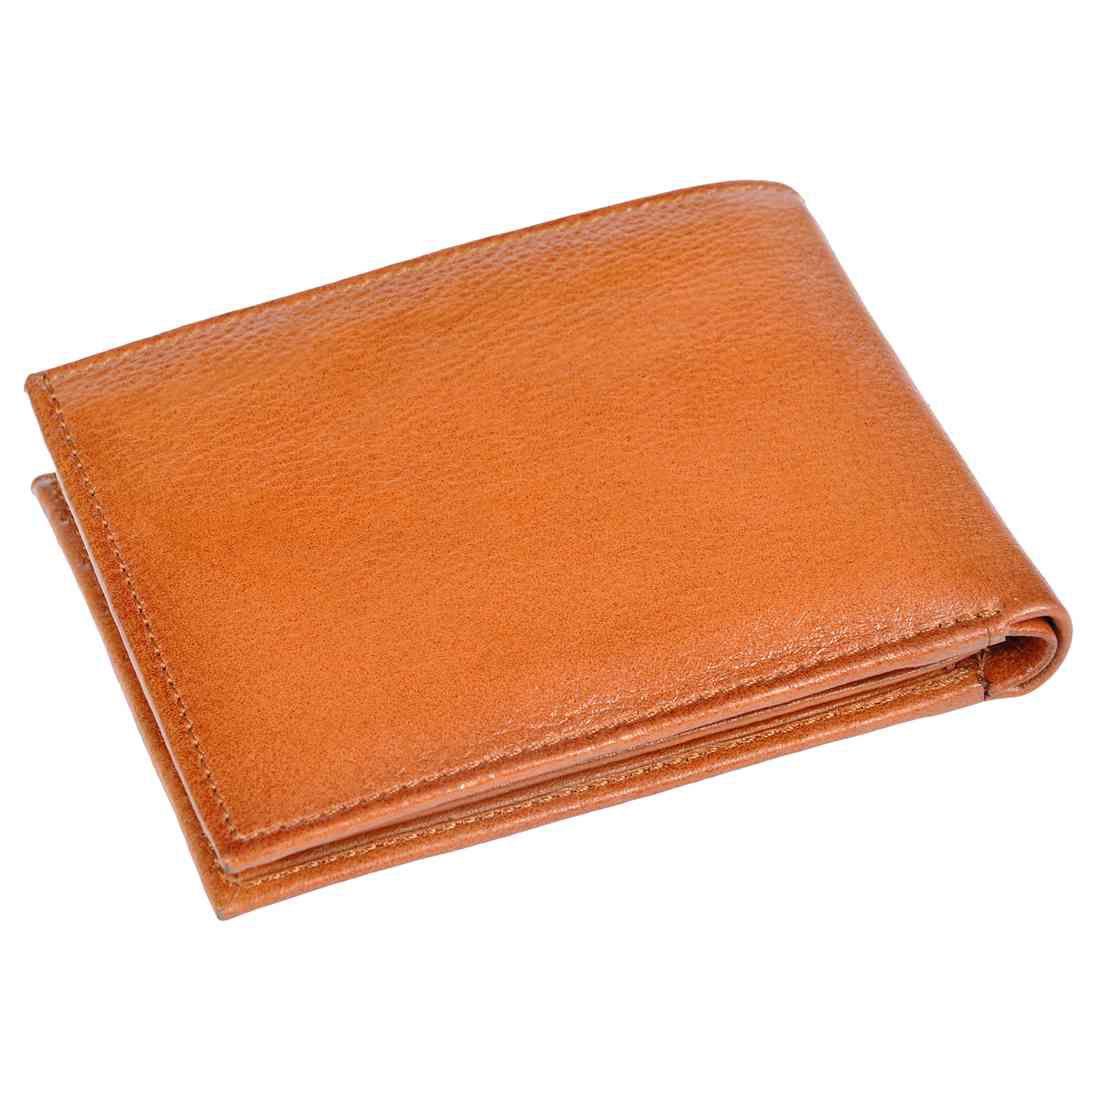 OHM New York Perimeter Stitched Leather Wallet